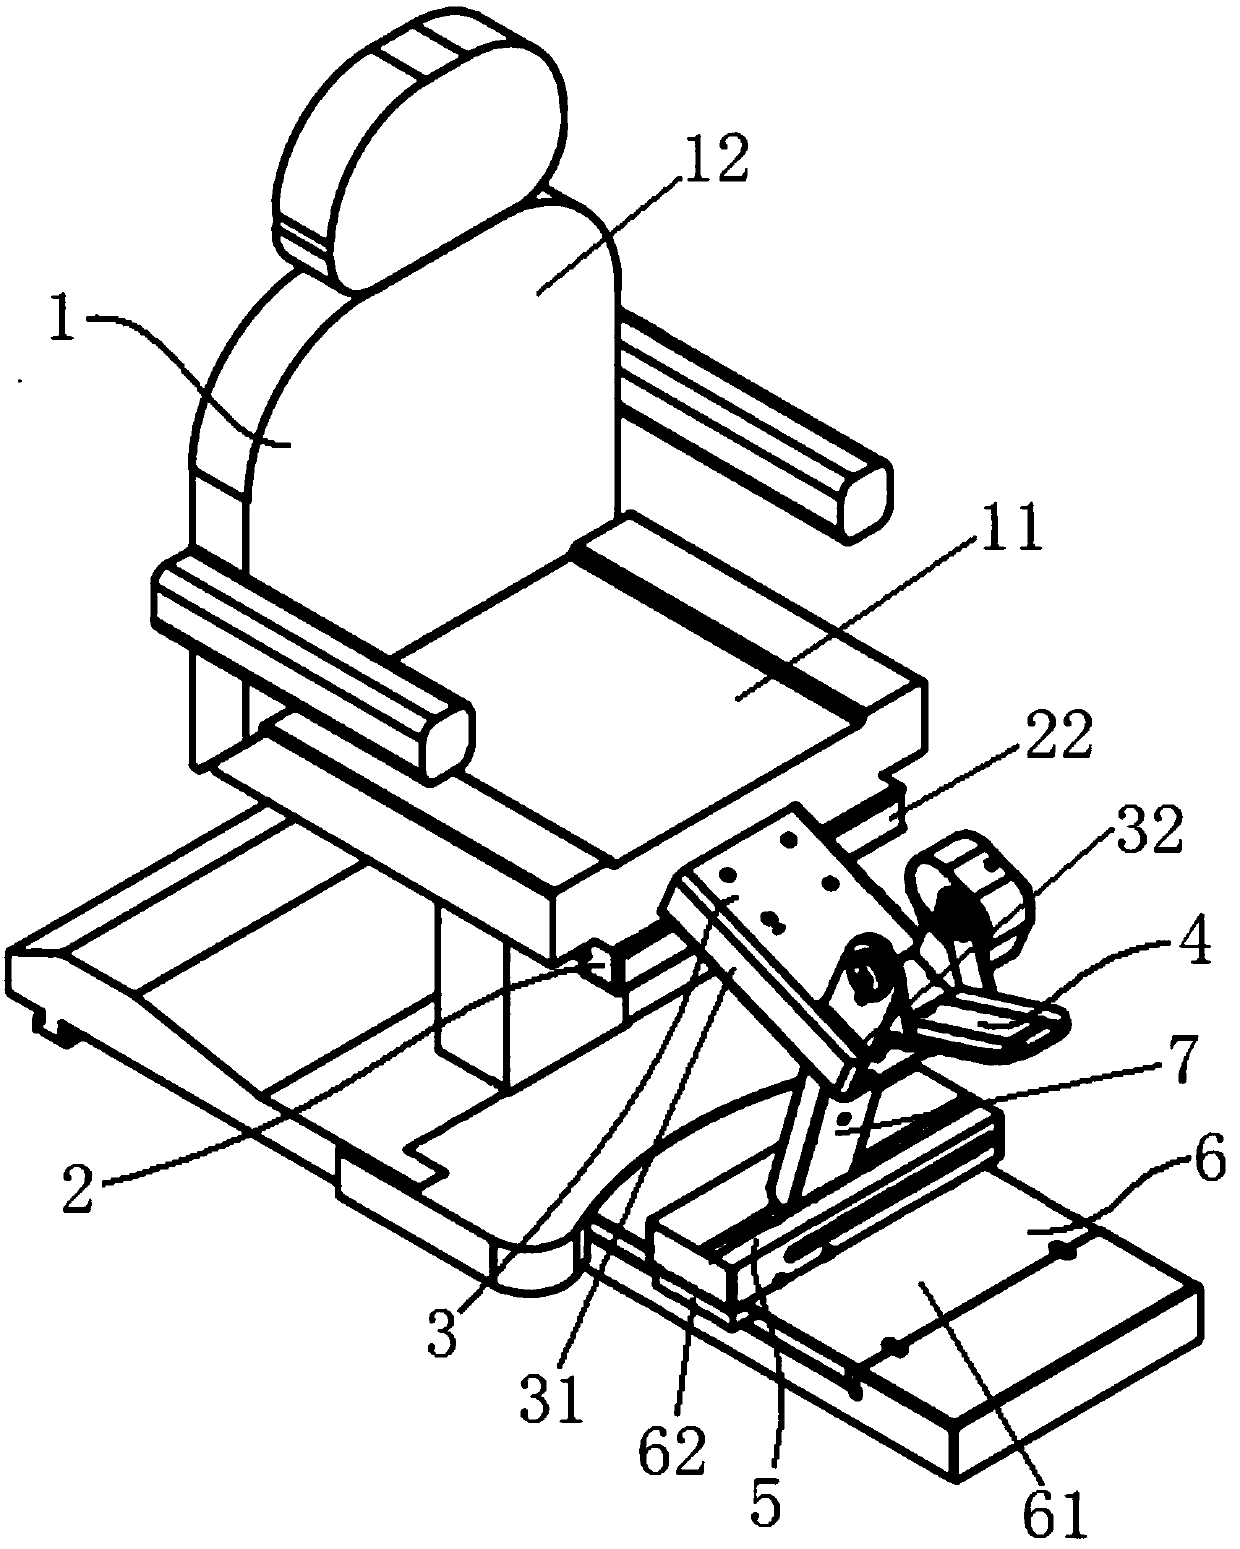 An ankle joint rehabilitation device capable of adjusting leg posture